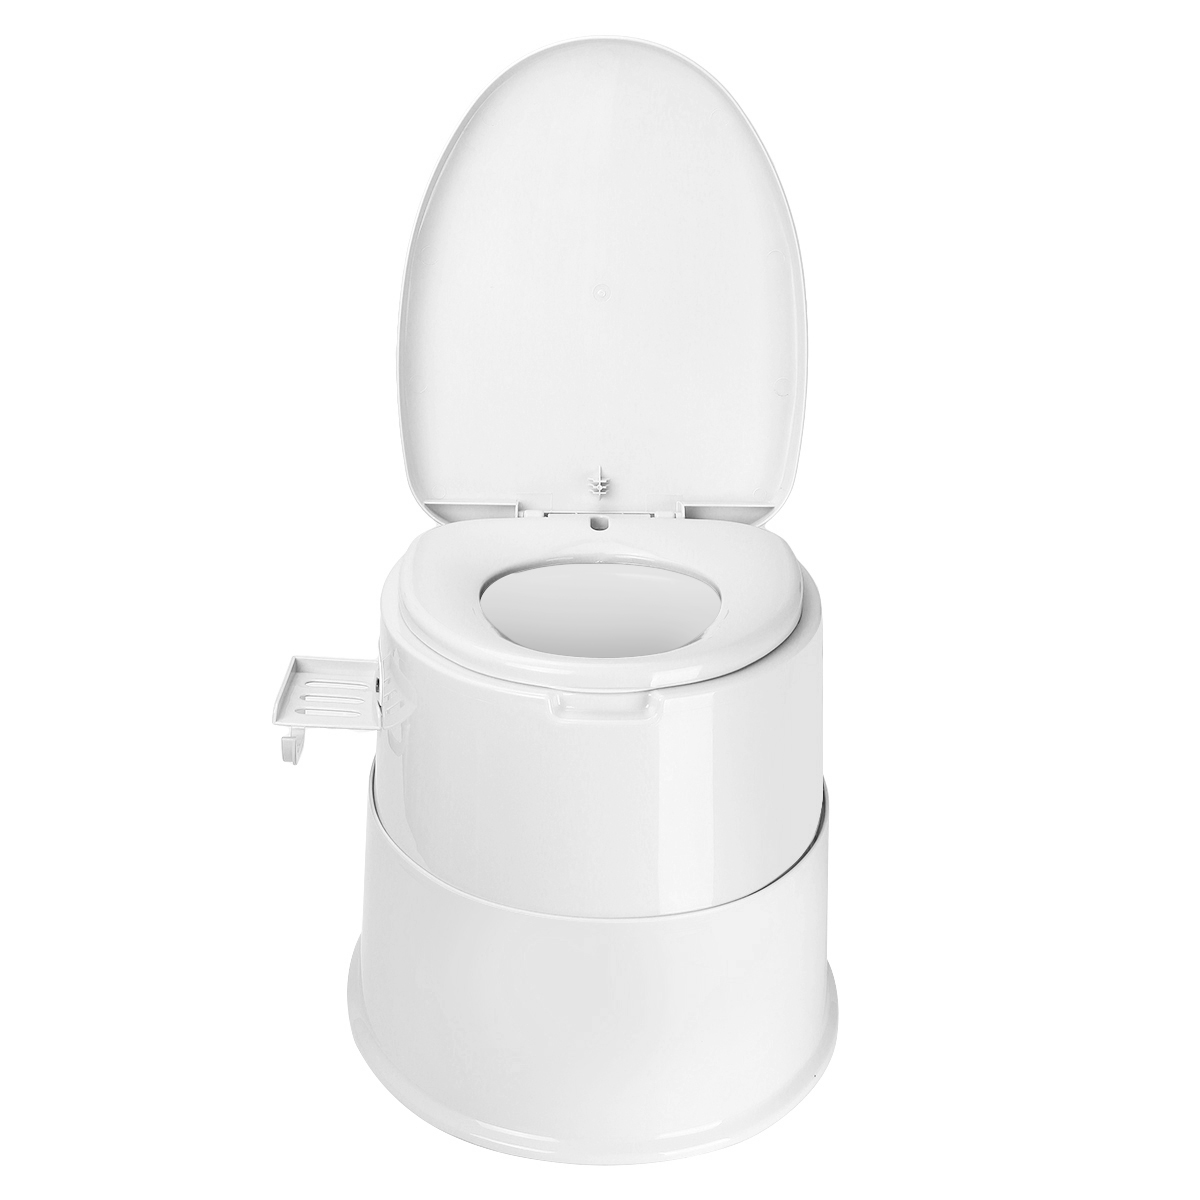 Portable Toilet Squatting Elderly Toilet Stool Multifunction Bedpan Pregnant Elderly Urinal Stool Chair With Paper Roll Holder